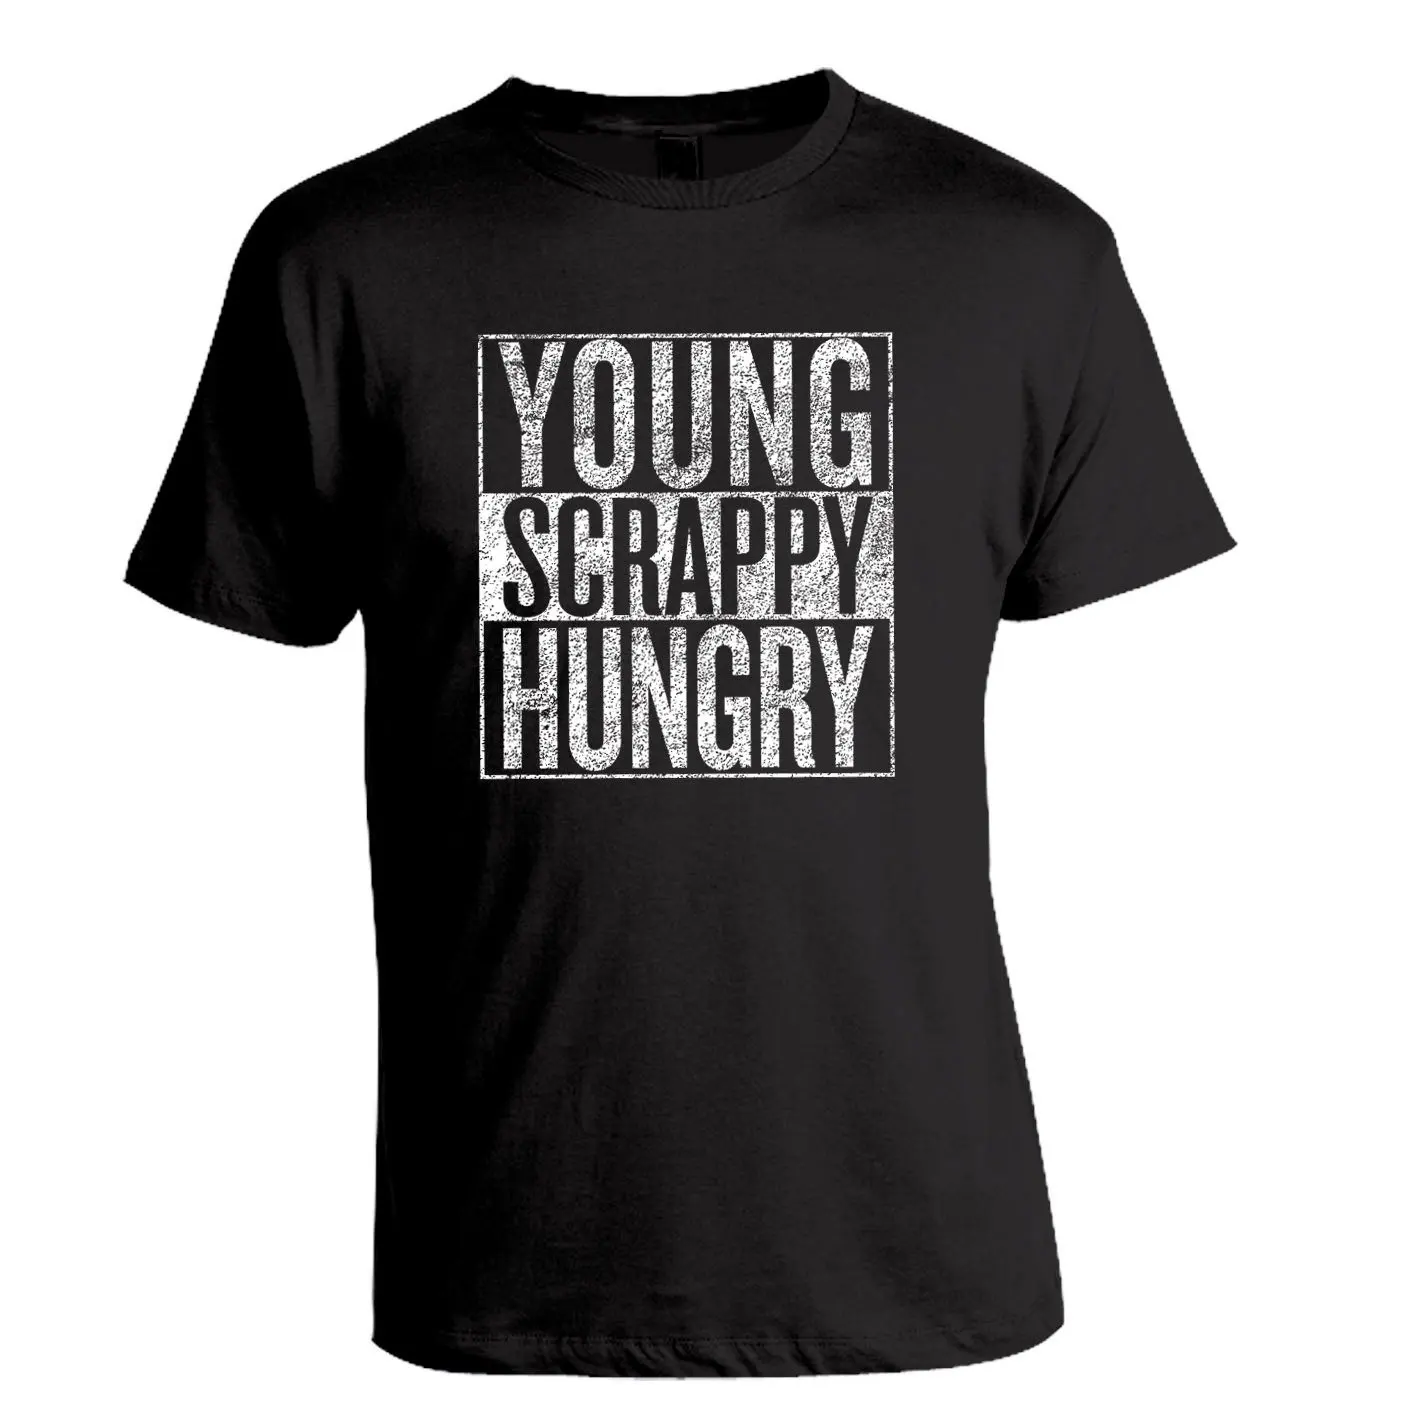 Rise Up Hamilton Shirt for Women Short Sleeve Young Scrappy /& Hungry Musical Tee Shirt